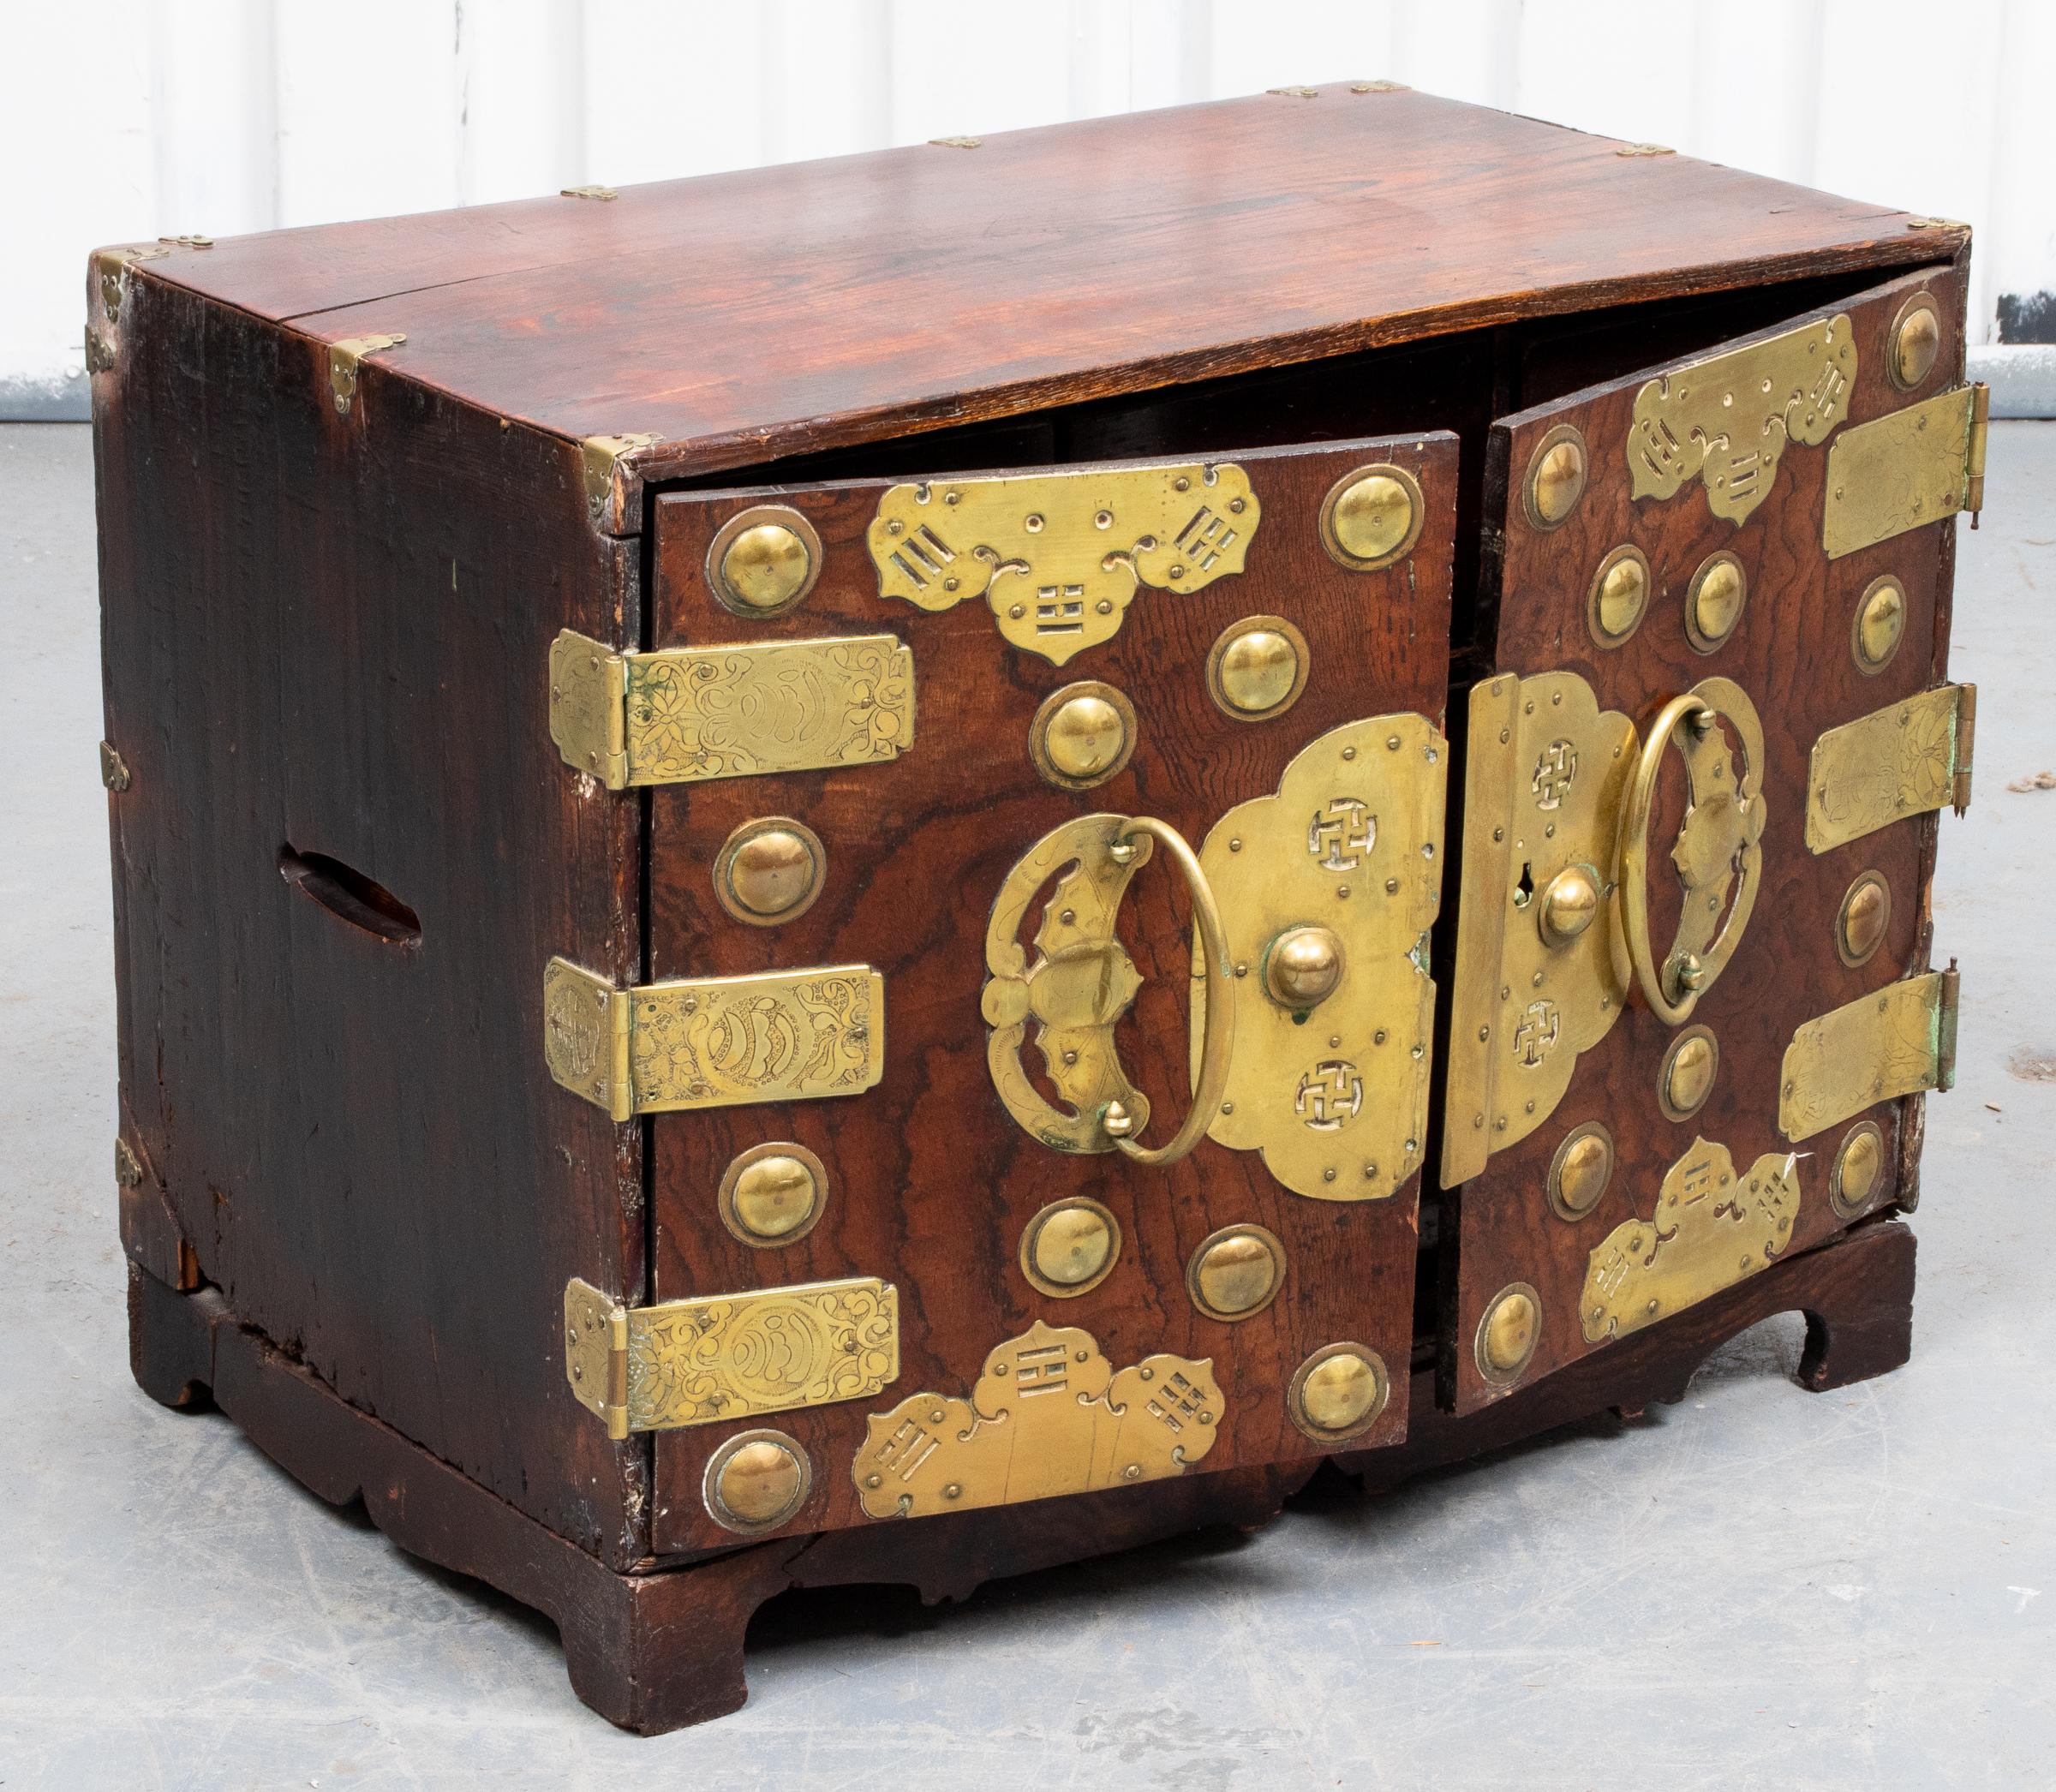 Asian hardwood cabinet, overall with brass mounts etched with symbols, the doors reveal six interior drawers. Measures: 15” H x 20” W x 12.5” D.